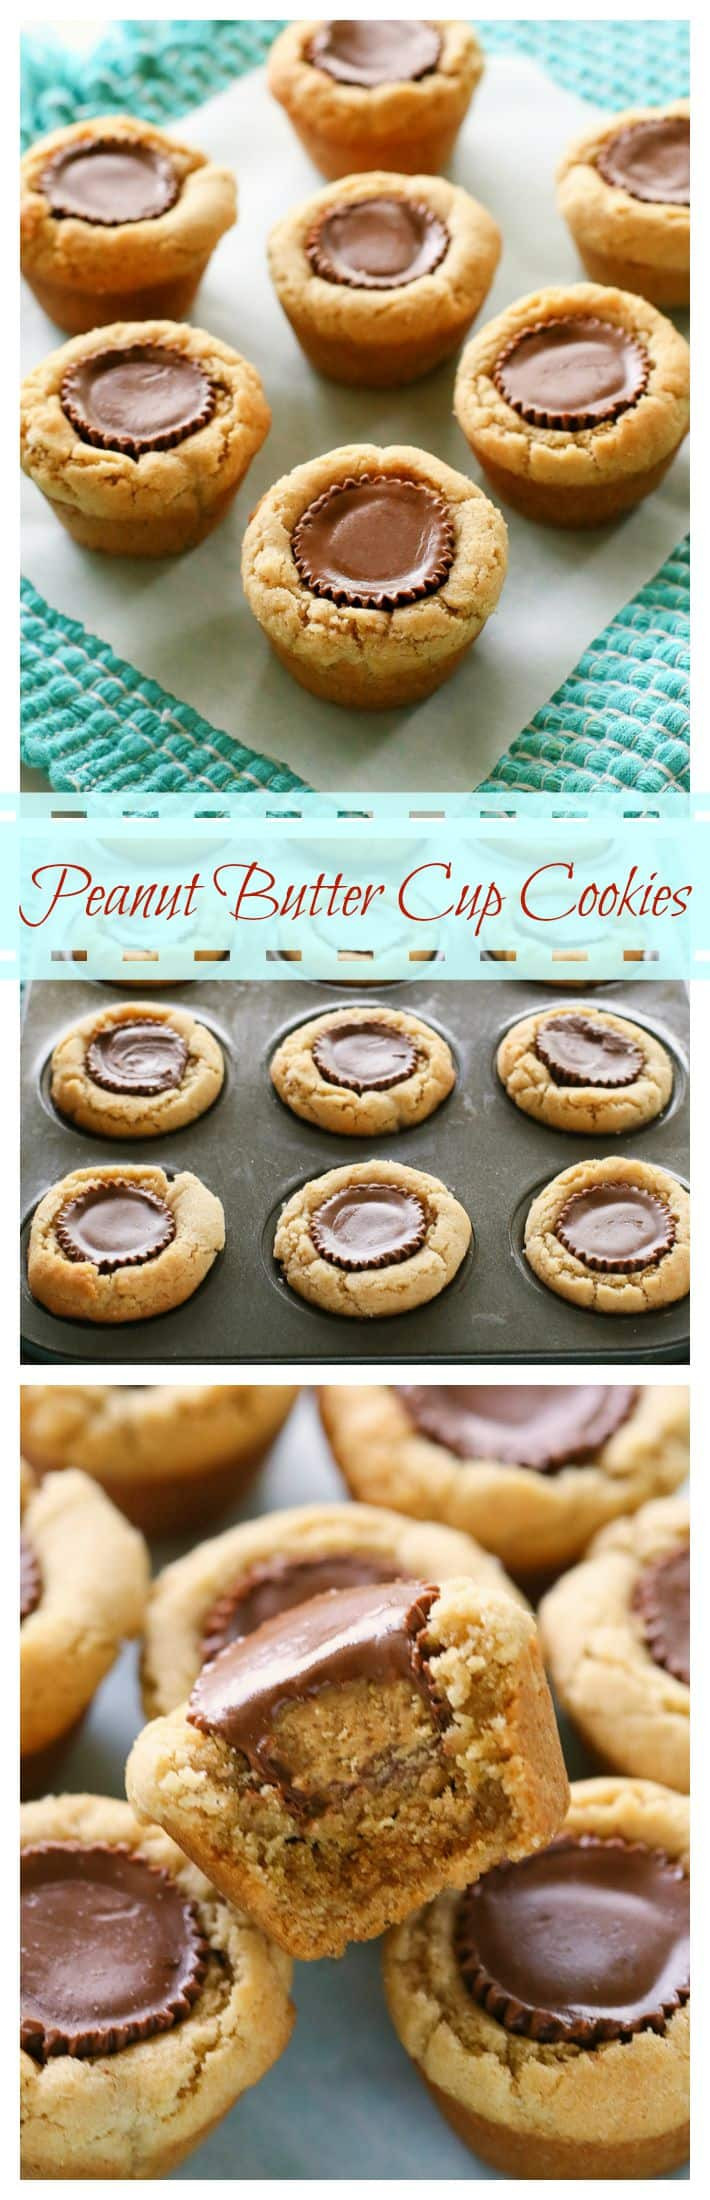 Peanut Butter Cookies With Peanut Butter Cups
 Peanut Butter Cup Cookies The Girl Who Ate Everything